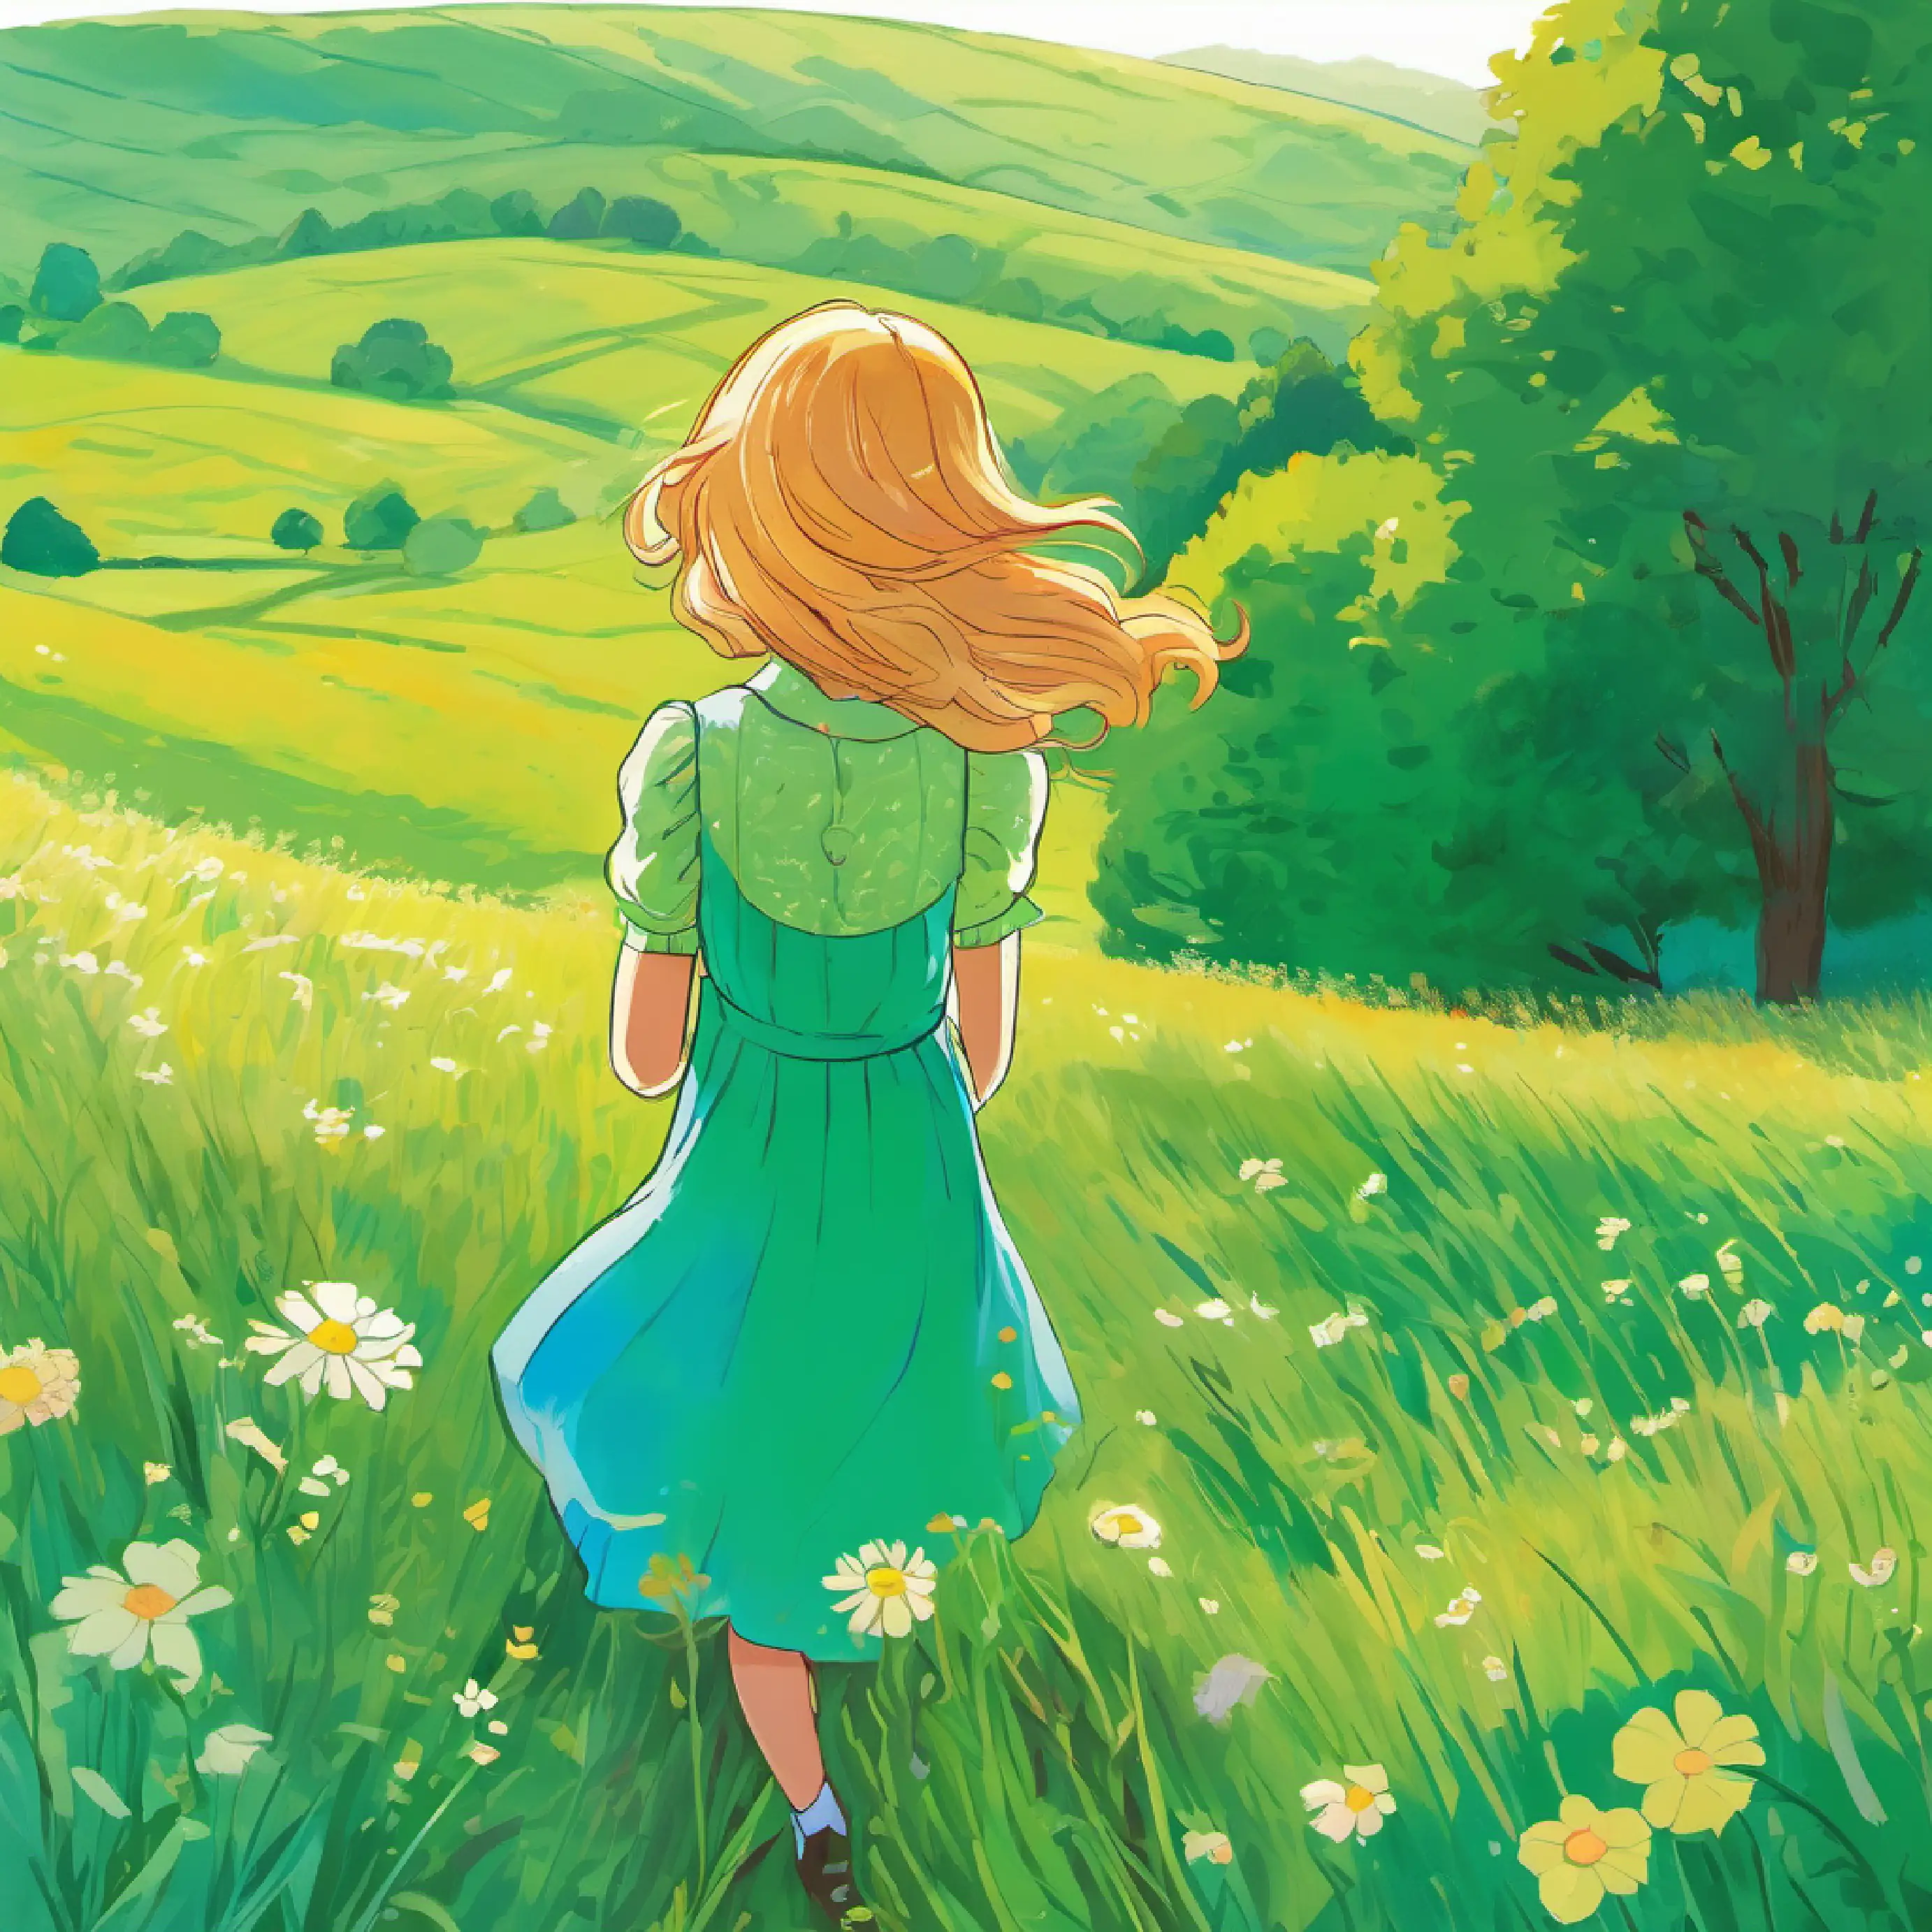 Girl with sunny hair, full of hope, bright blue eyes, wears a green dress looking down at the meadow from the top, feeling hopeful.